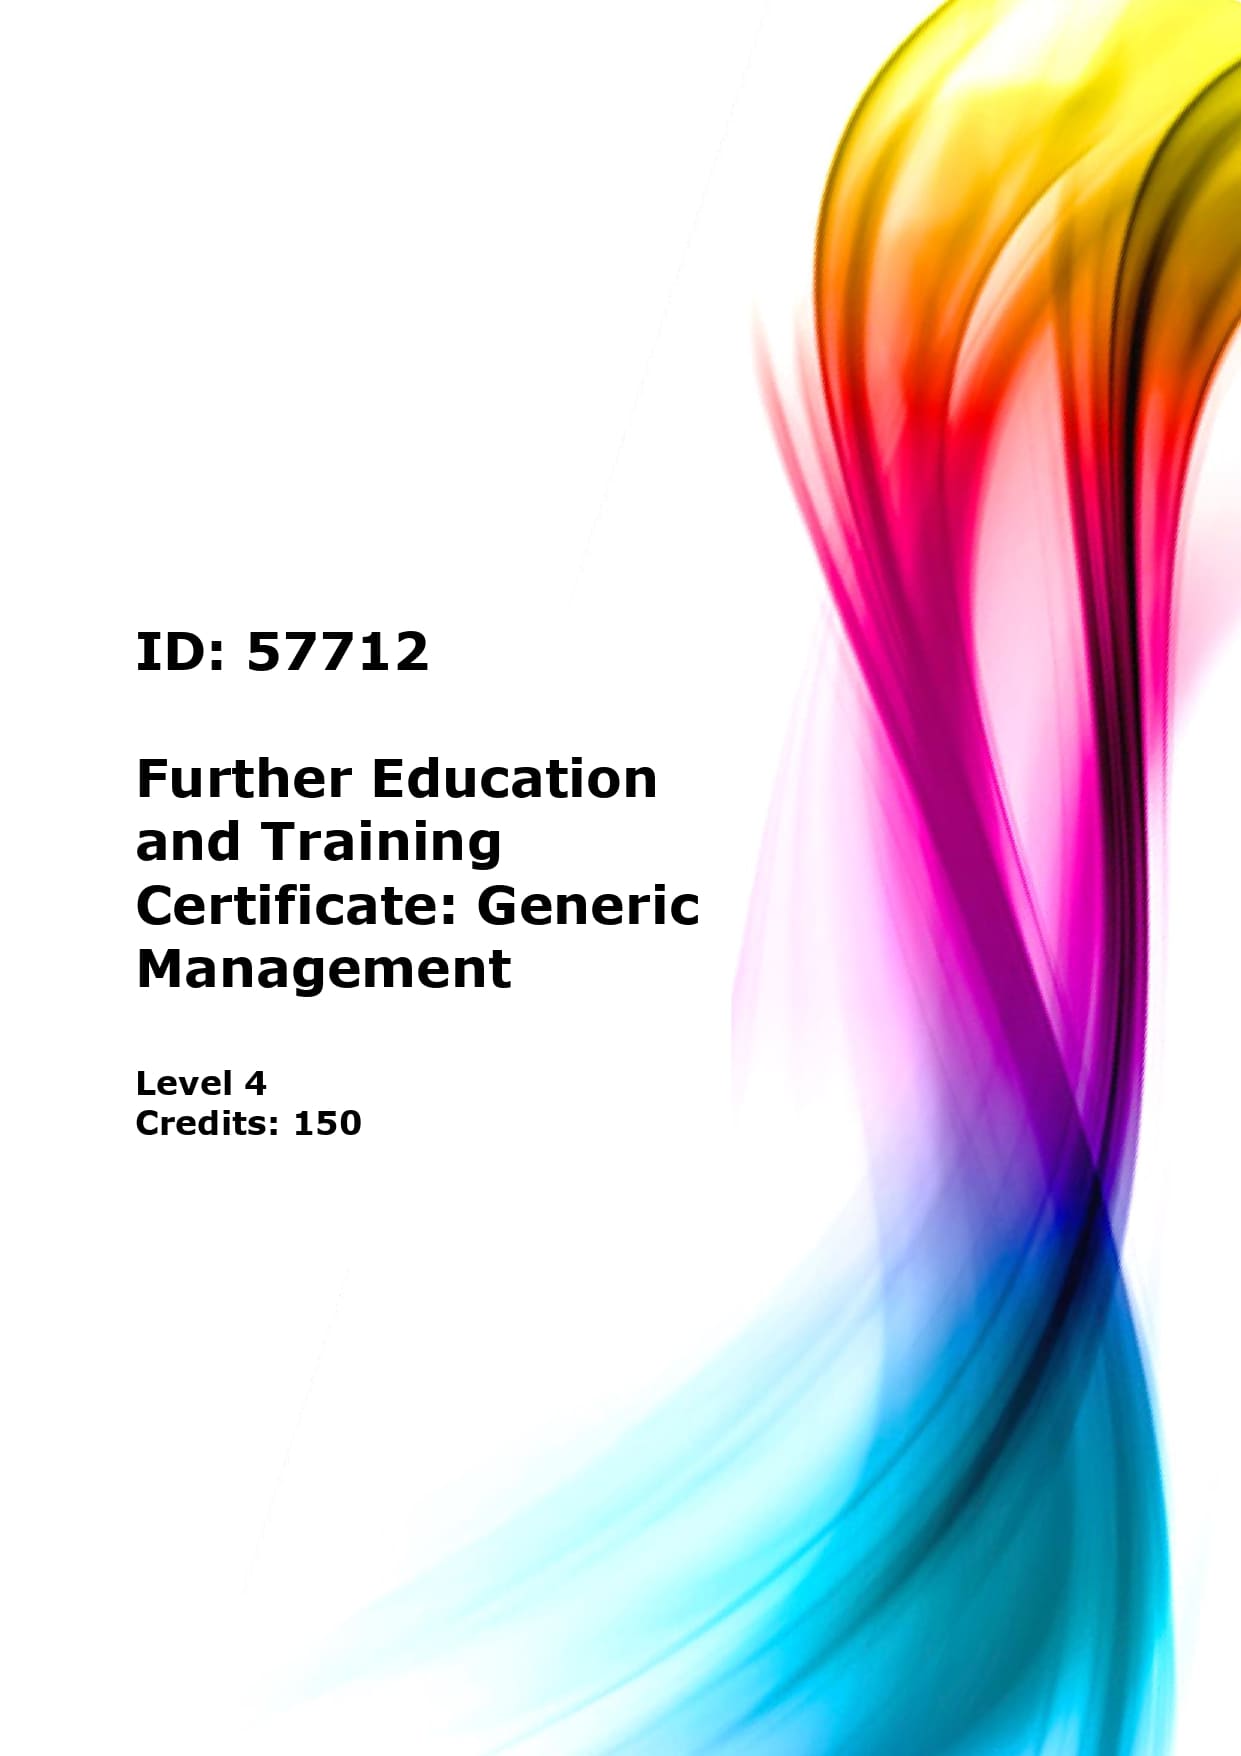 Further Education and Training Certificate: Generic Management